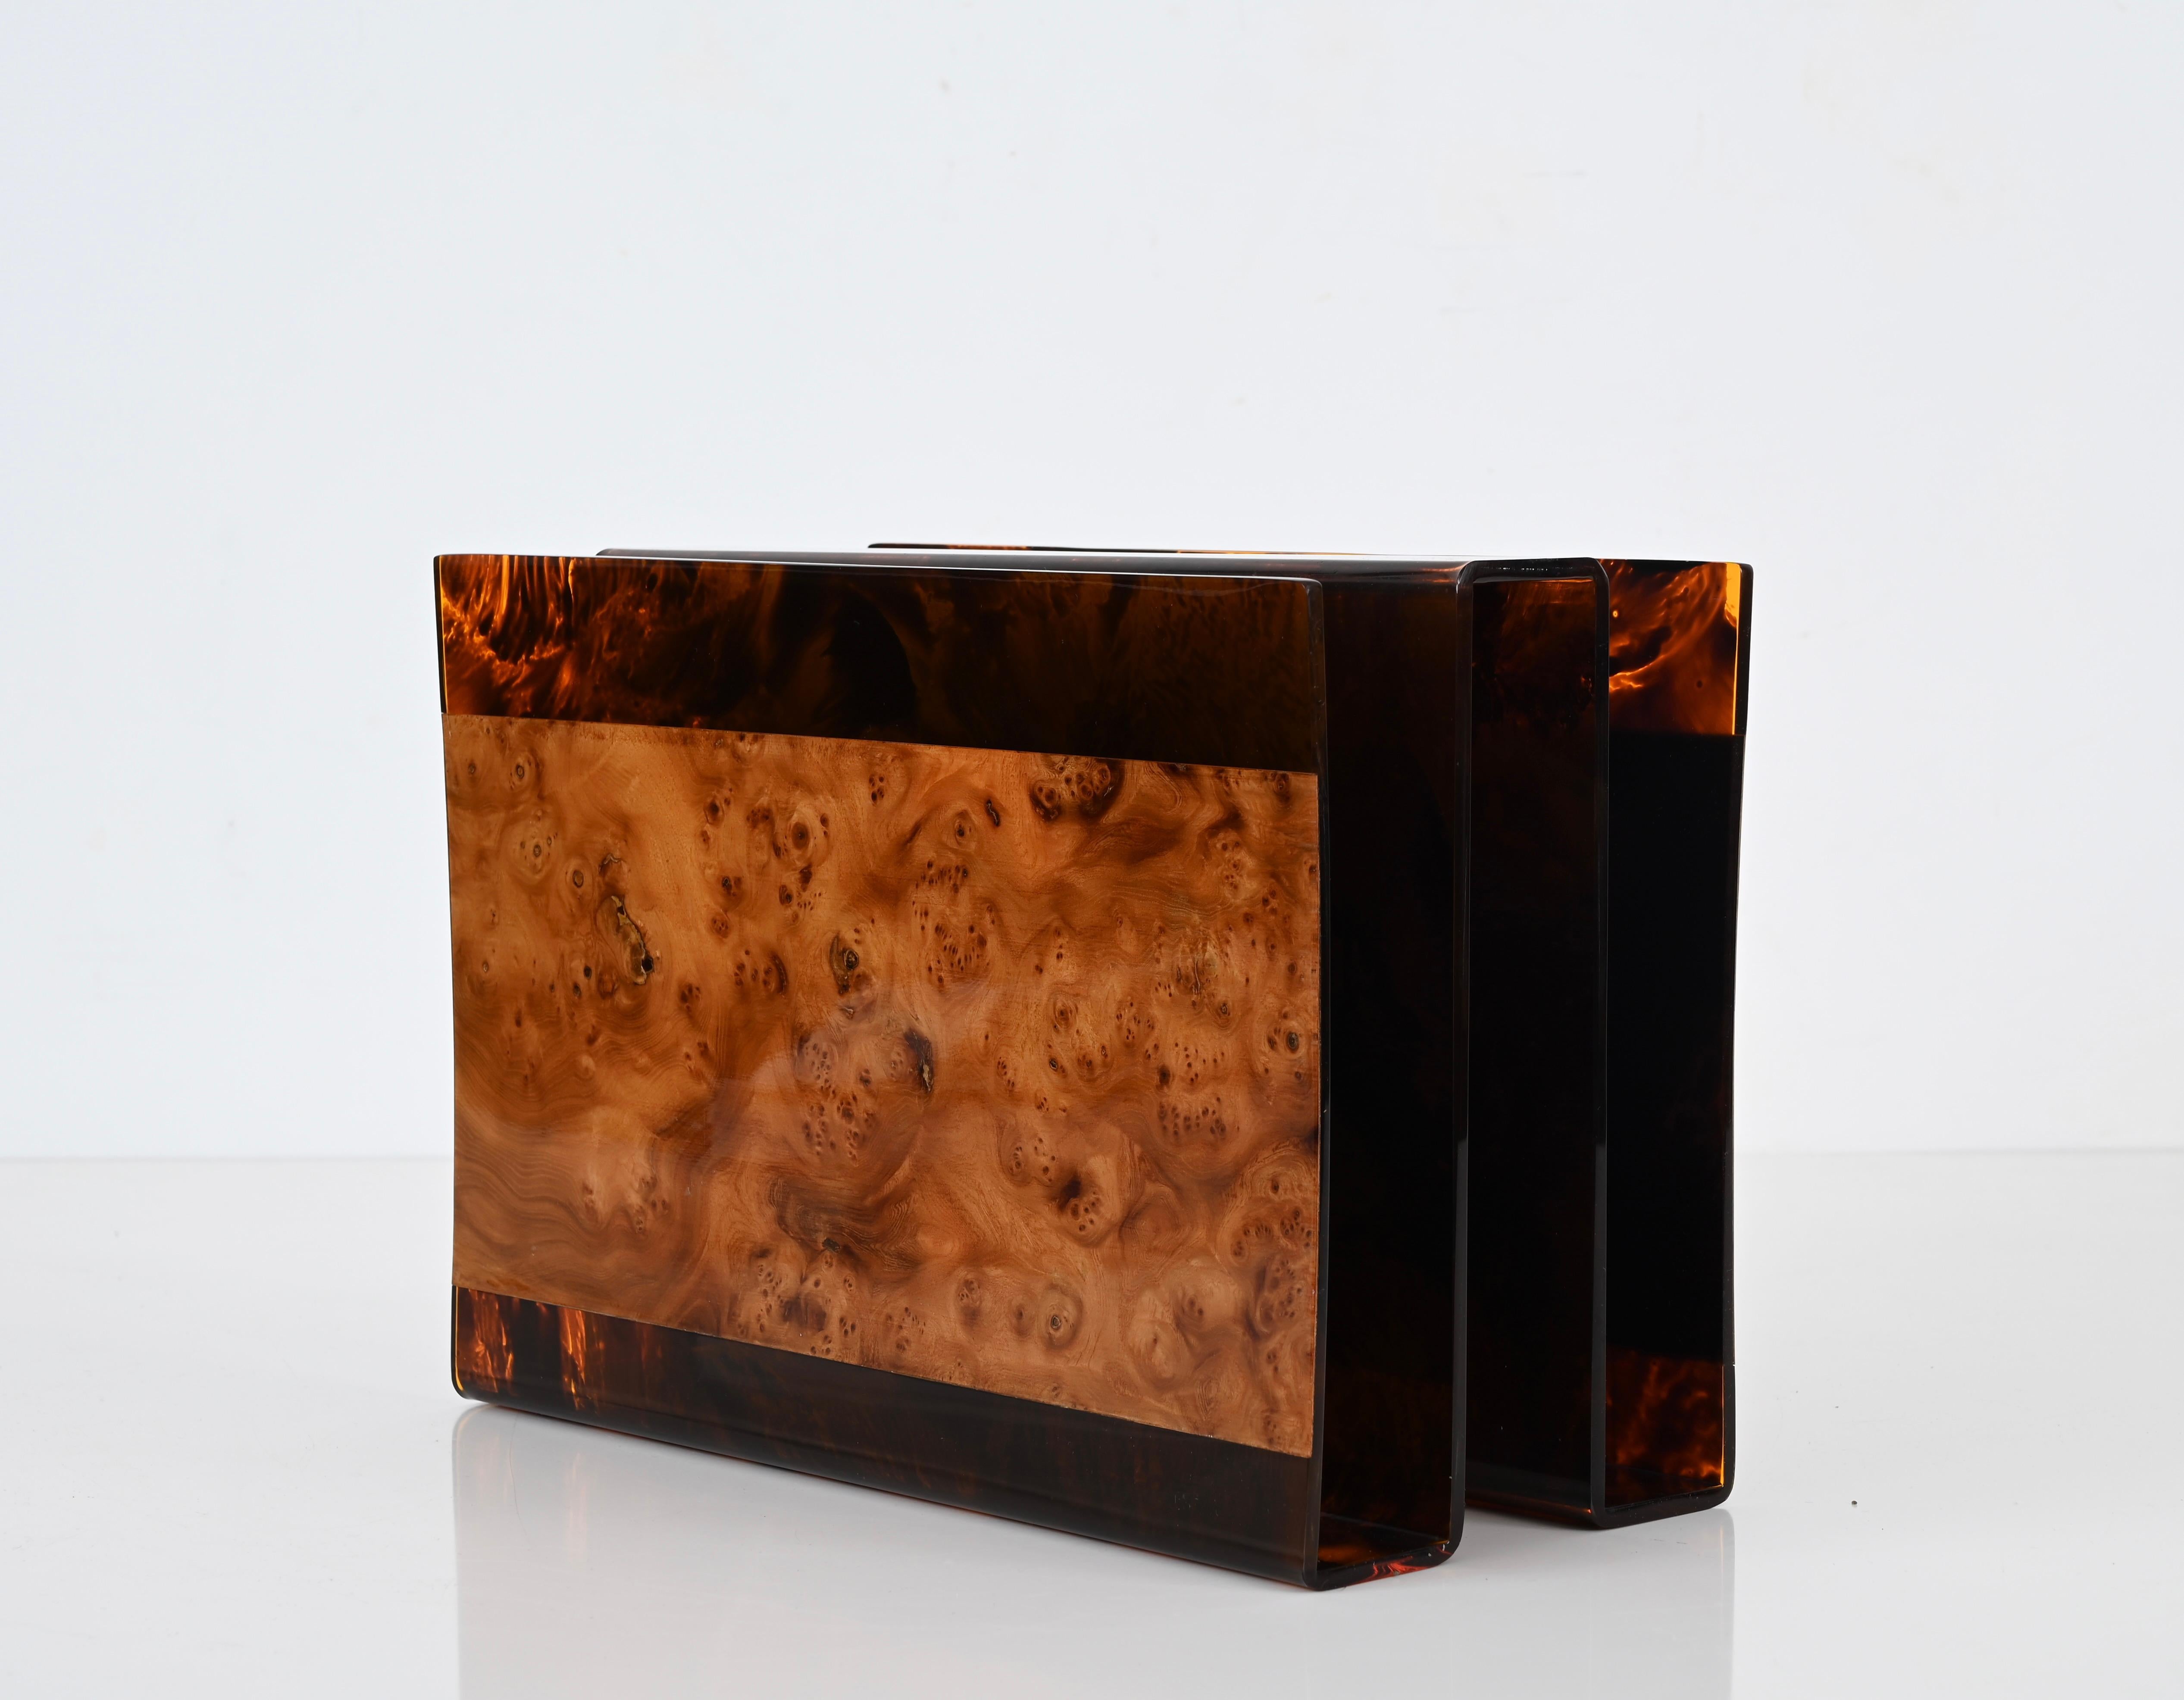 Guzzini Magazine Rack in Tortoiseshell Lucite and Briar, Italy 1970s For Sale 2